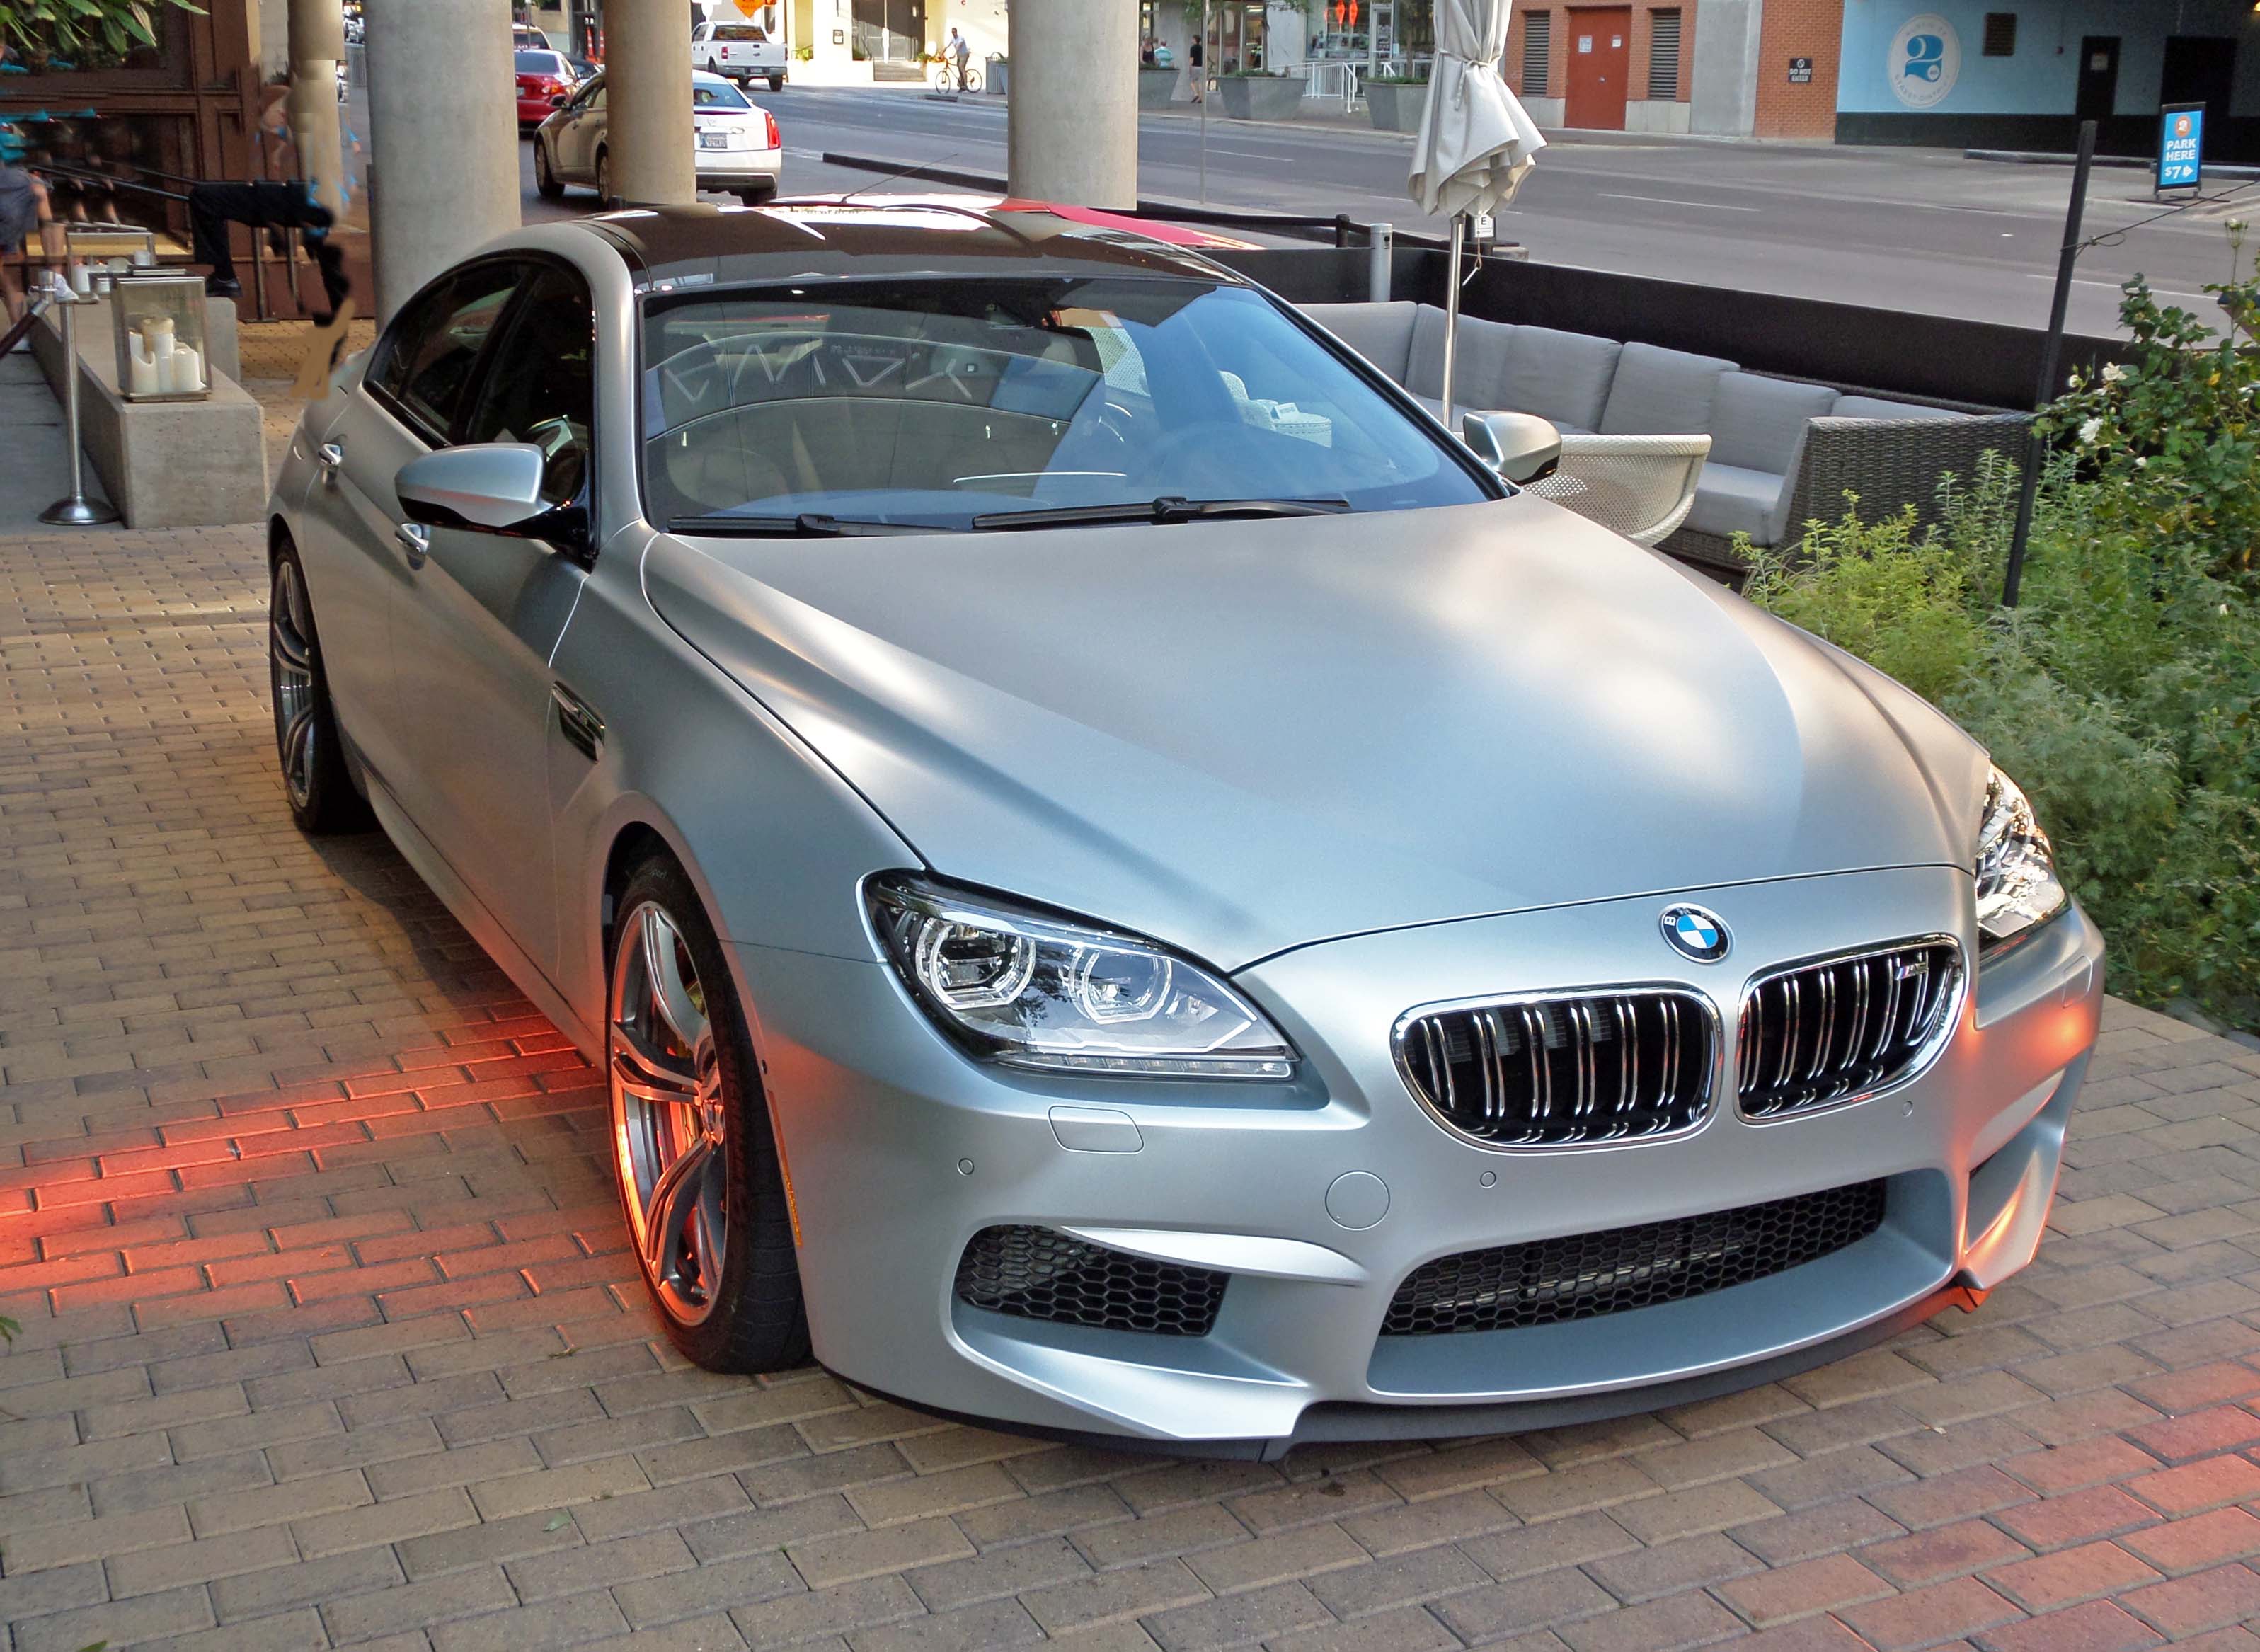 2014 BMW M6 Gran Coupe Test Drive | Our Auto Expert